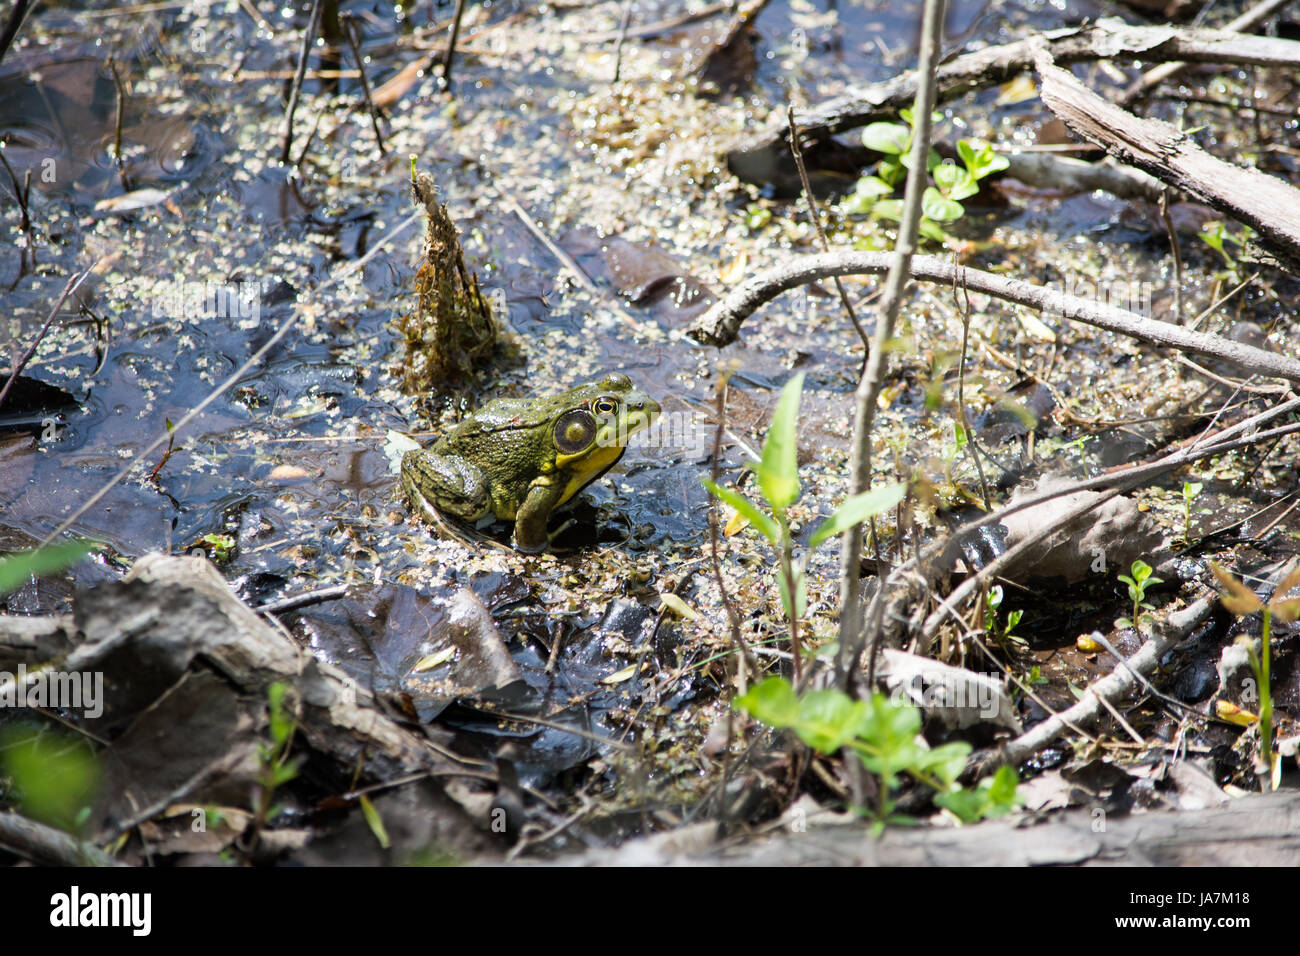 bullfrog in wet swamp area with weeds are ground cover. Stock Photo